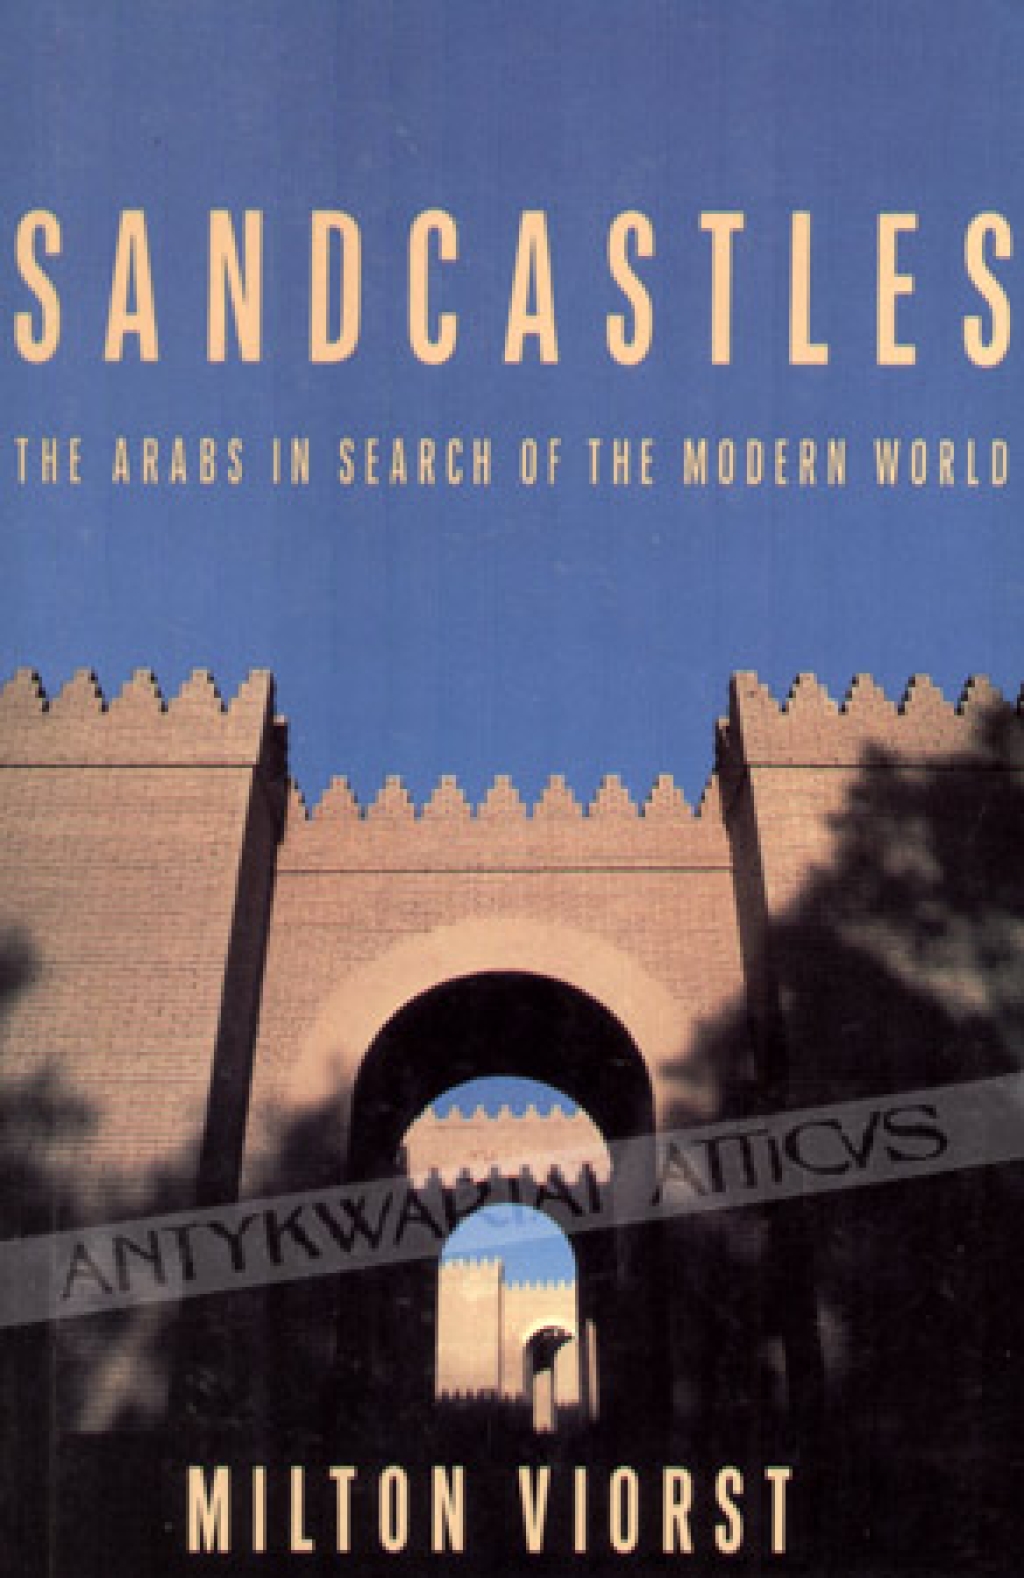 Sandcastles. The Arabs in Search of the Modern World